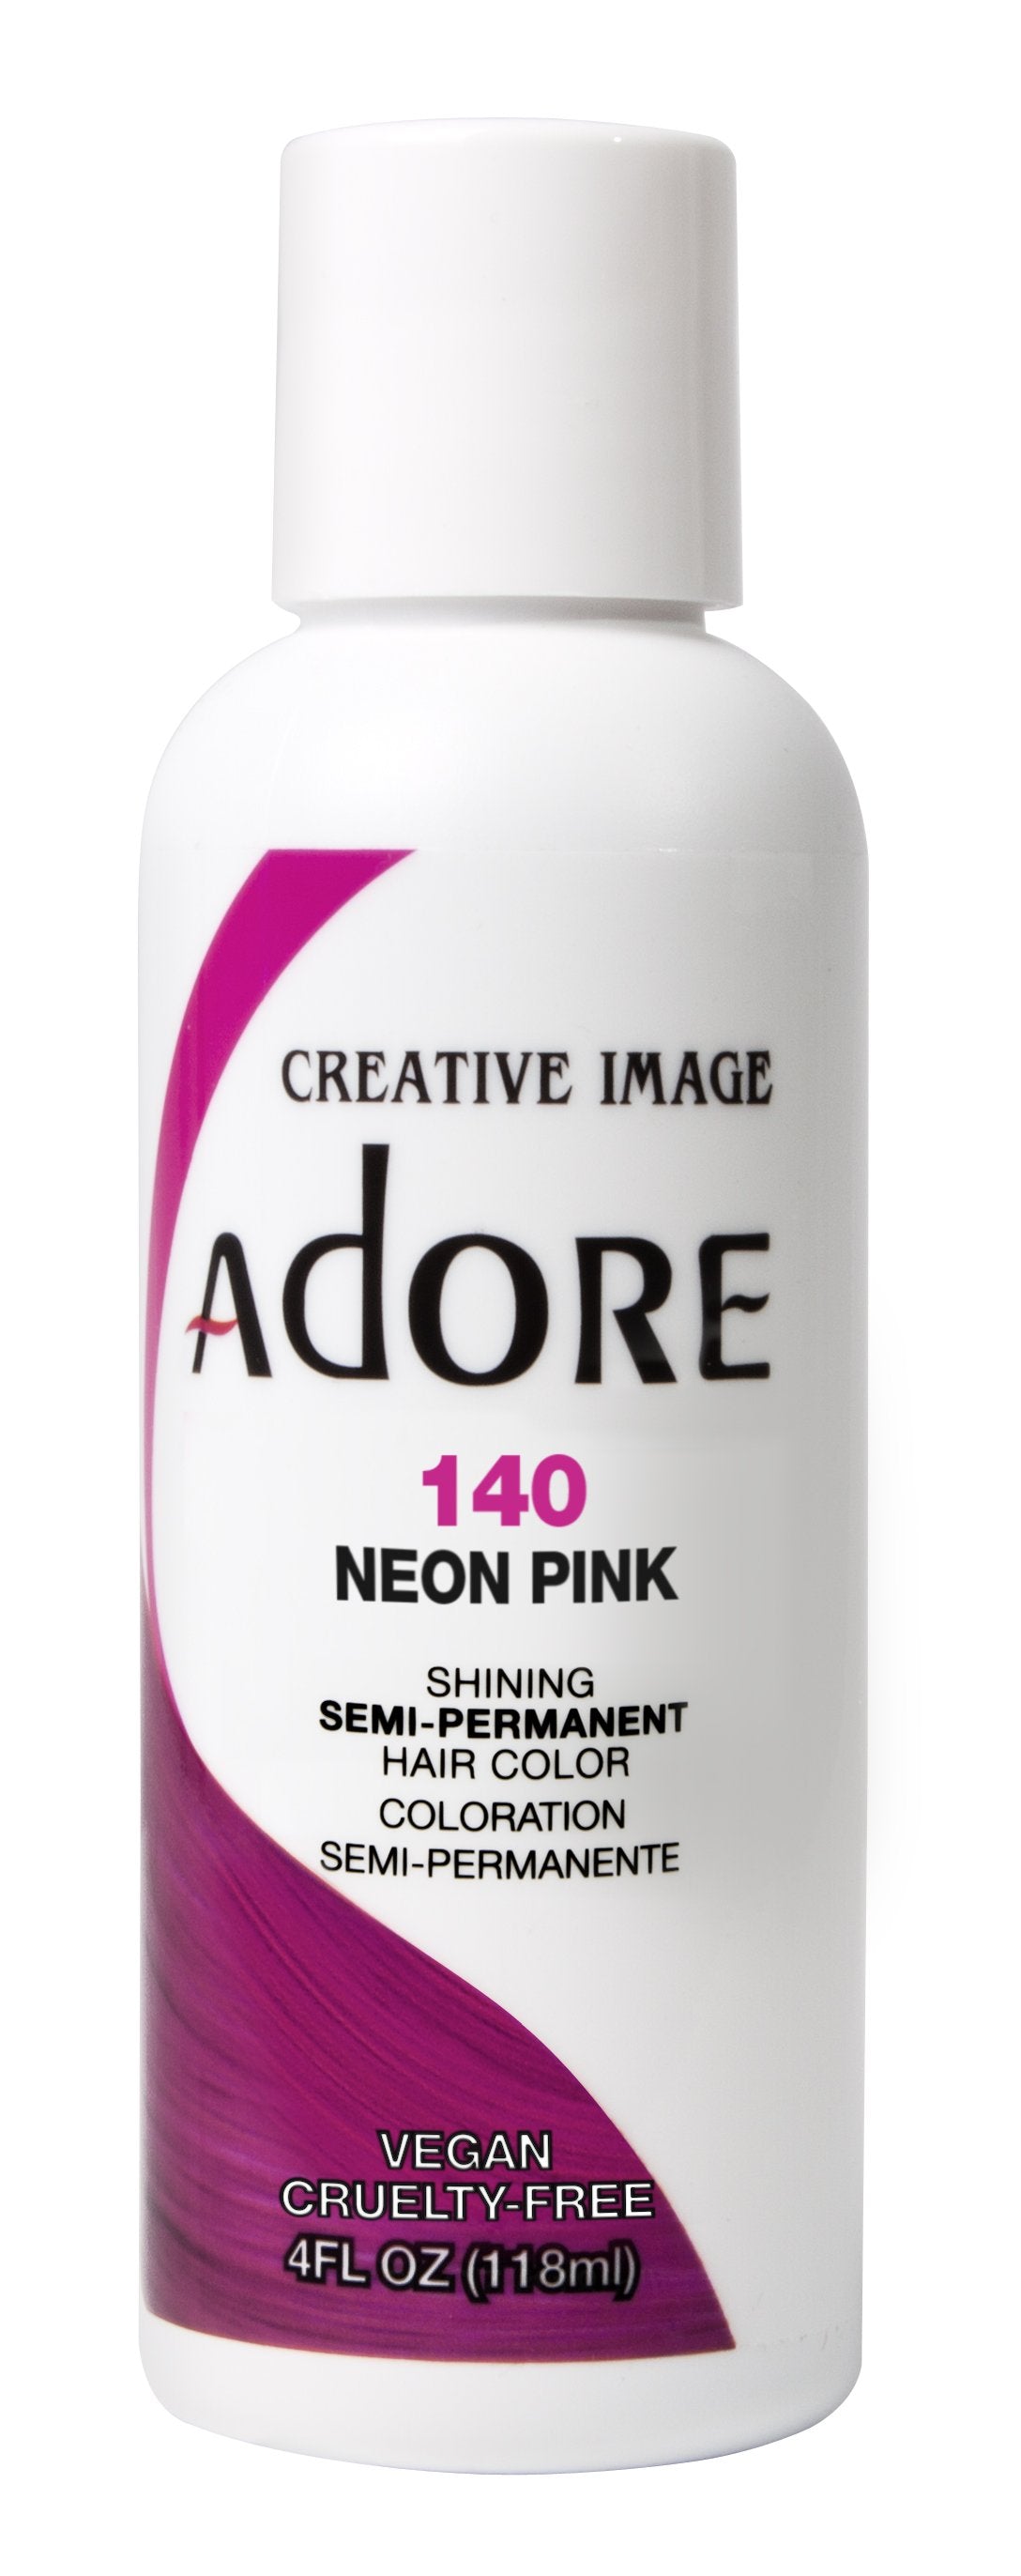 Adore #140 Neon Pink